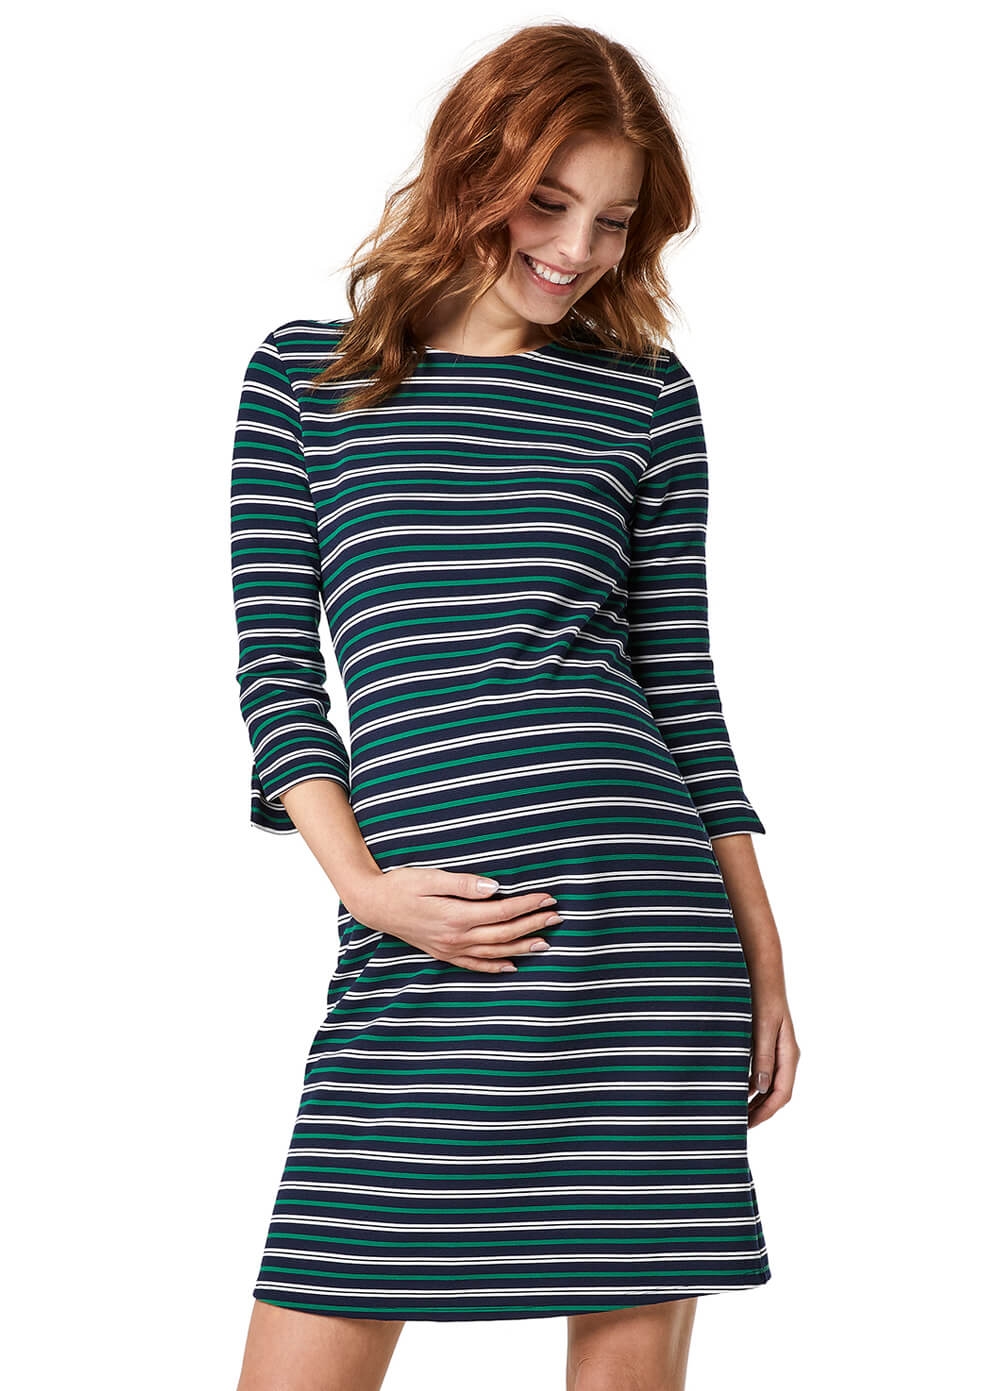 Sky Captain Maternity Shift Dress in Green Stripes by Queen mum